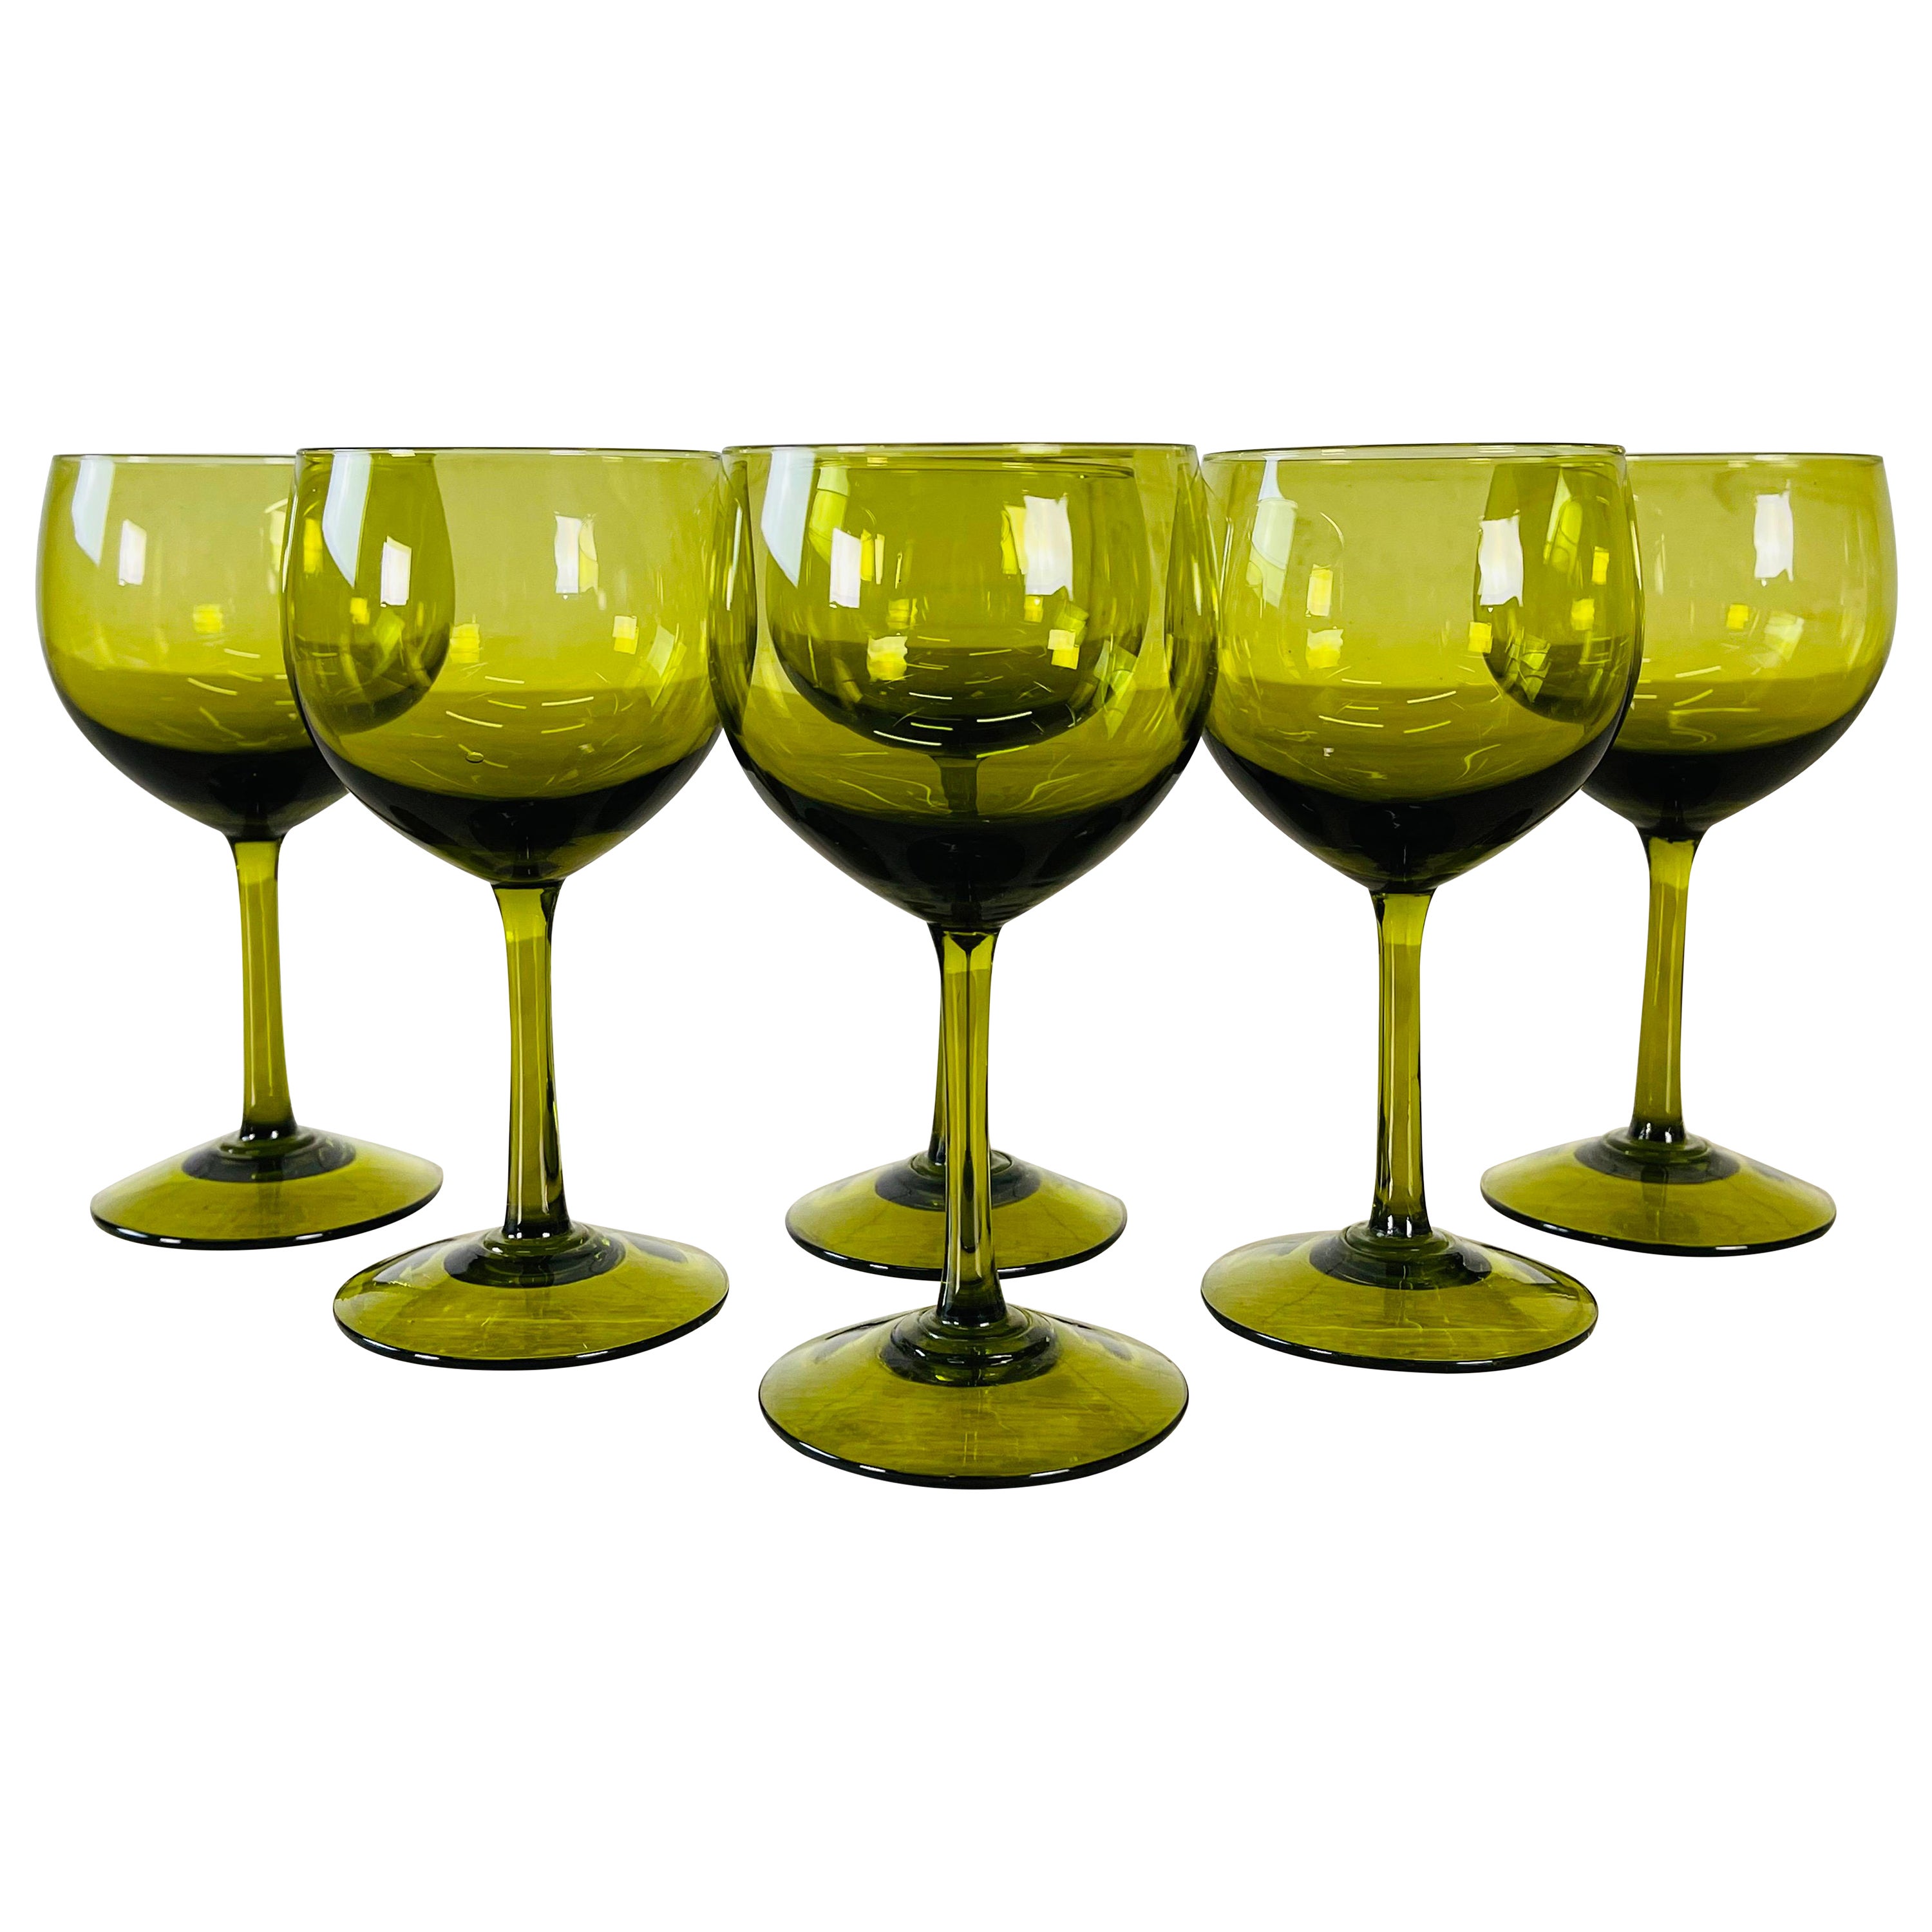 1960s Small Glass Wine Stems, Set of 6 For Sale